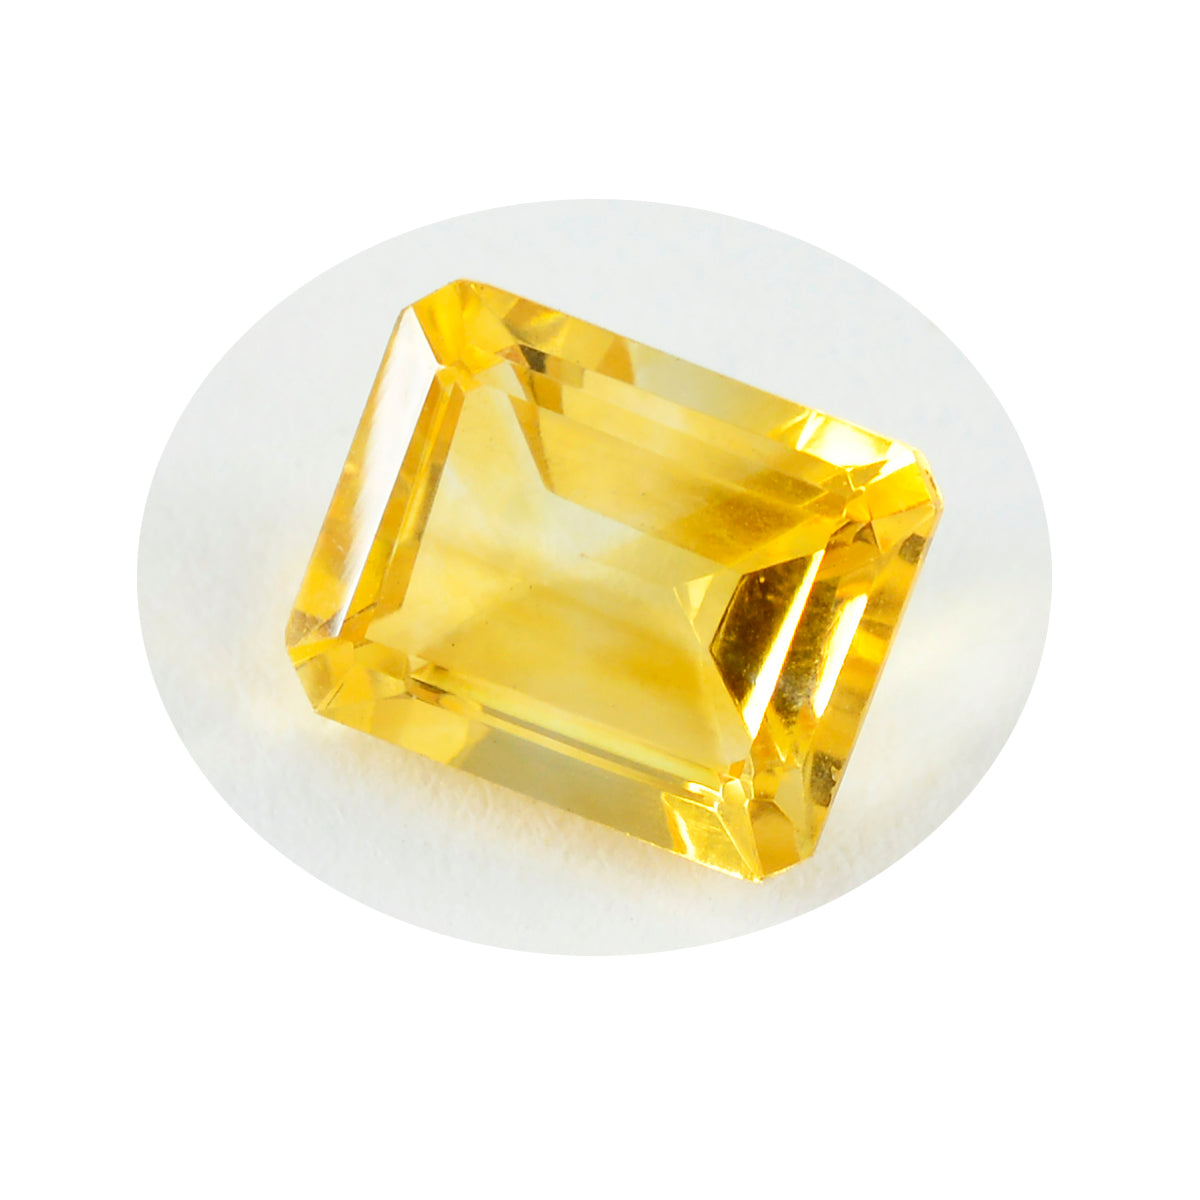 Riyogems 1PC Natural Yellow Citrine Faceted 10x14 mm Octagon Shape great Quality Gemstone